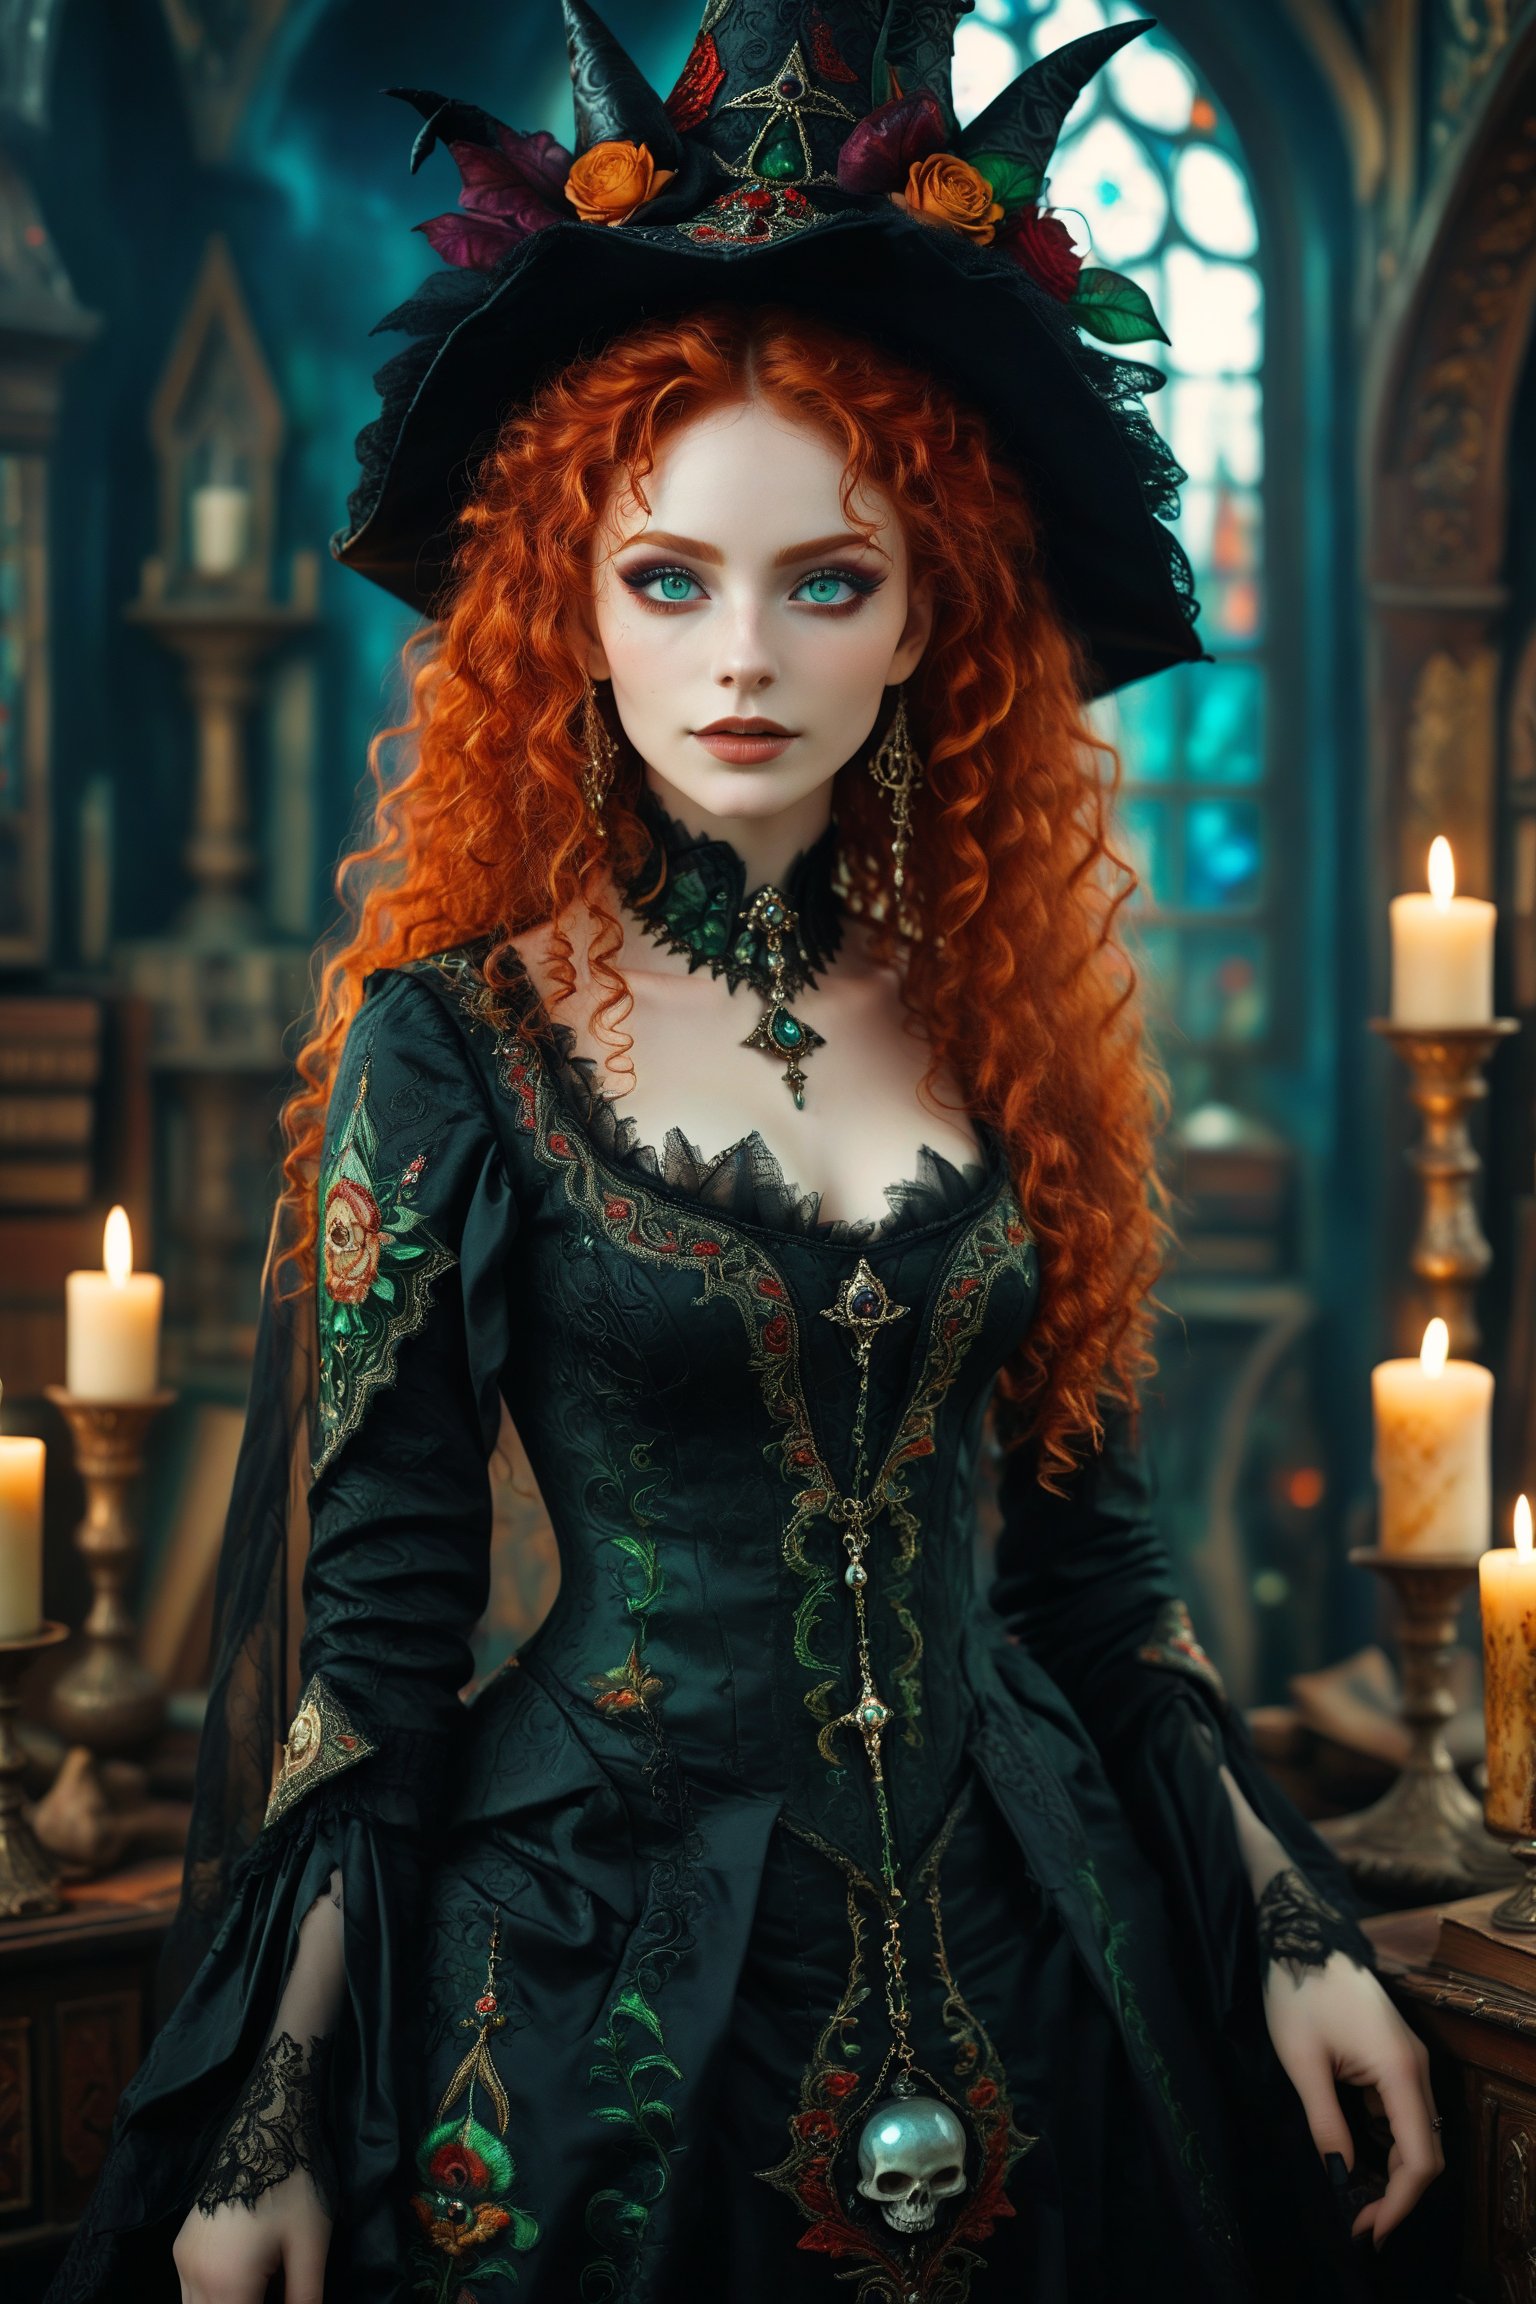 1girl,Envision a beautiful rococo gothic witch. long big vivid red curly hair, detailed green eyes. dark gothic make-up. smooth perfect skin, beautiful full lips. she has a warm, welcoming smile. she is resplendent in a beautiful witch dress adorned with intricate gothic embroidery, with rich colors and luxurious fabrics. she wears a conical, pointy-tipped witch hat adorned with intricate gothic embroidery,  rich colors and luxurious fabrics. the detailed background is of her rococo witches lair of ancient leather books, spellbooks, potions, candles, crystal ball, skull. she is powerful and benevolent, a healer of the highest order. 